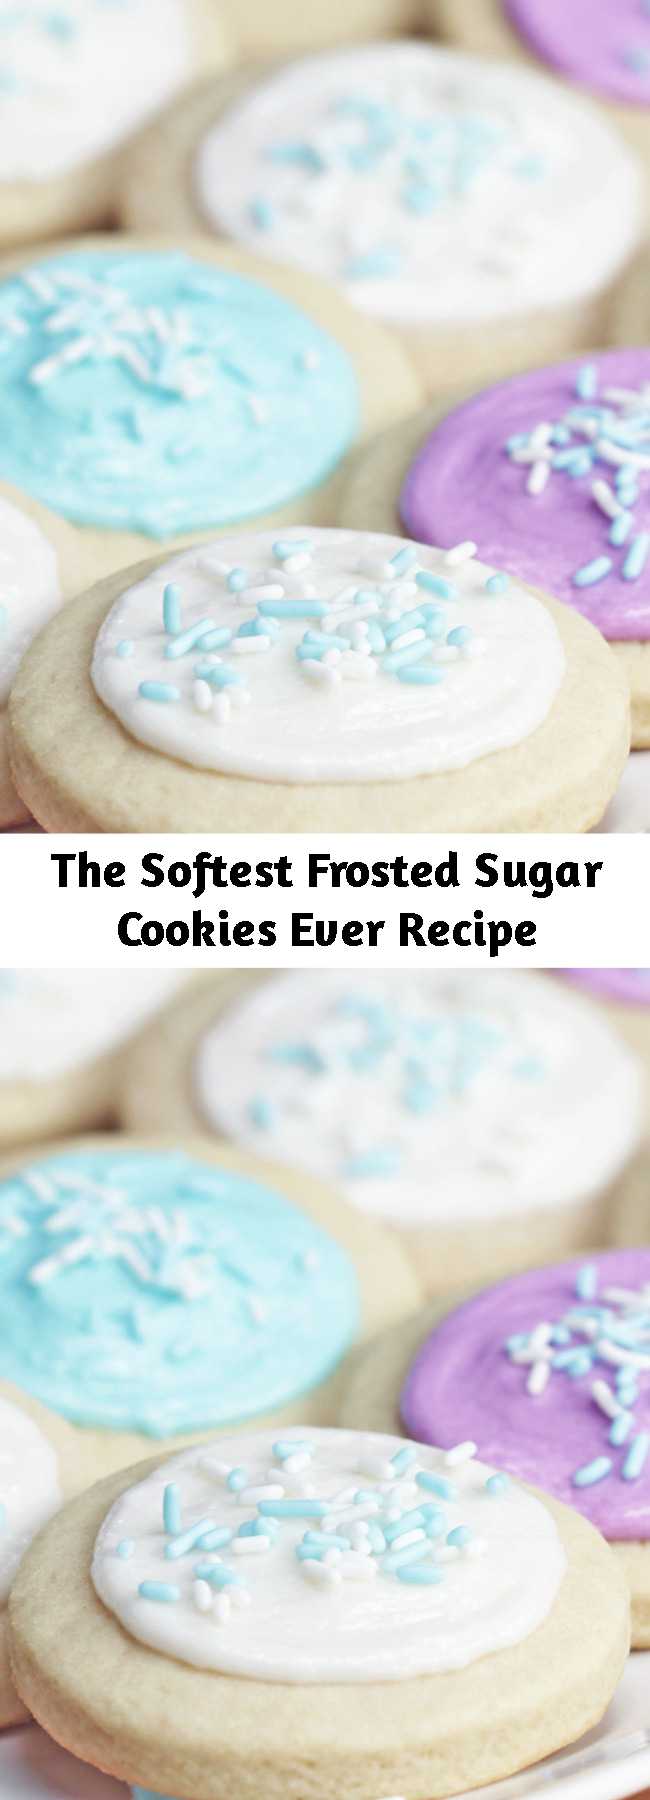 The Softest Frosted Sugar Cookies Ever Recipe - These insanely soft sugar cookies taste just like childhood.